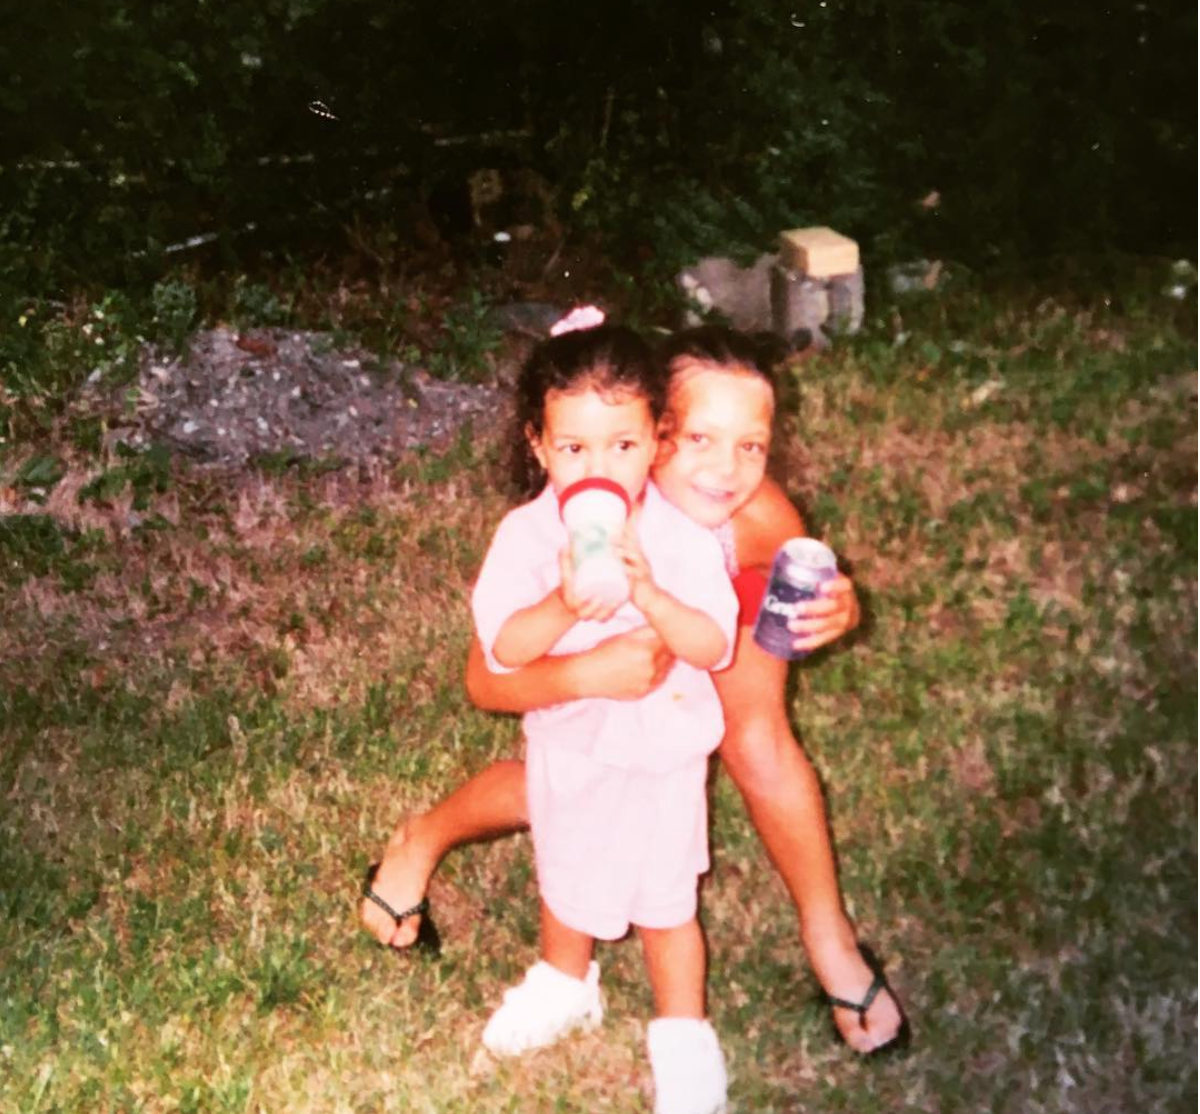 15 Perks Of Having Your Cousin Treat You Like A Little Sister